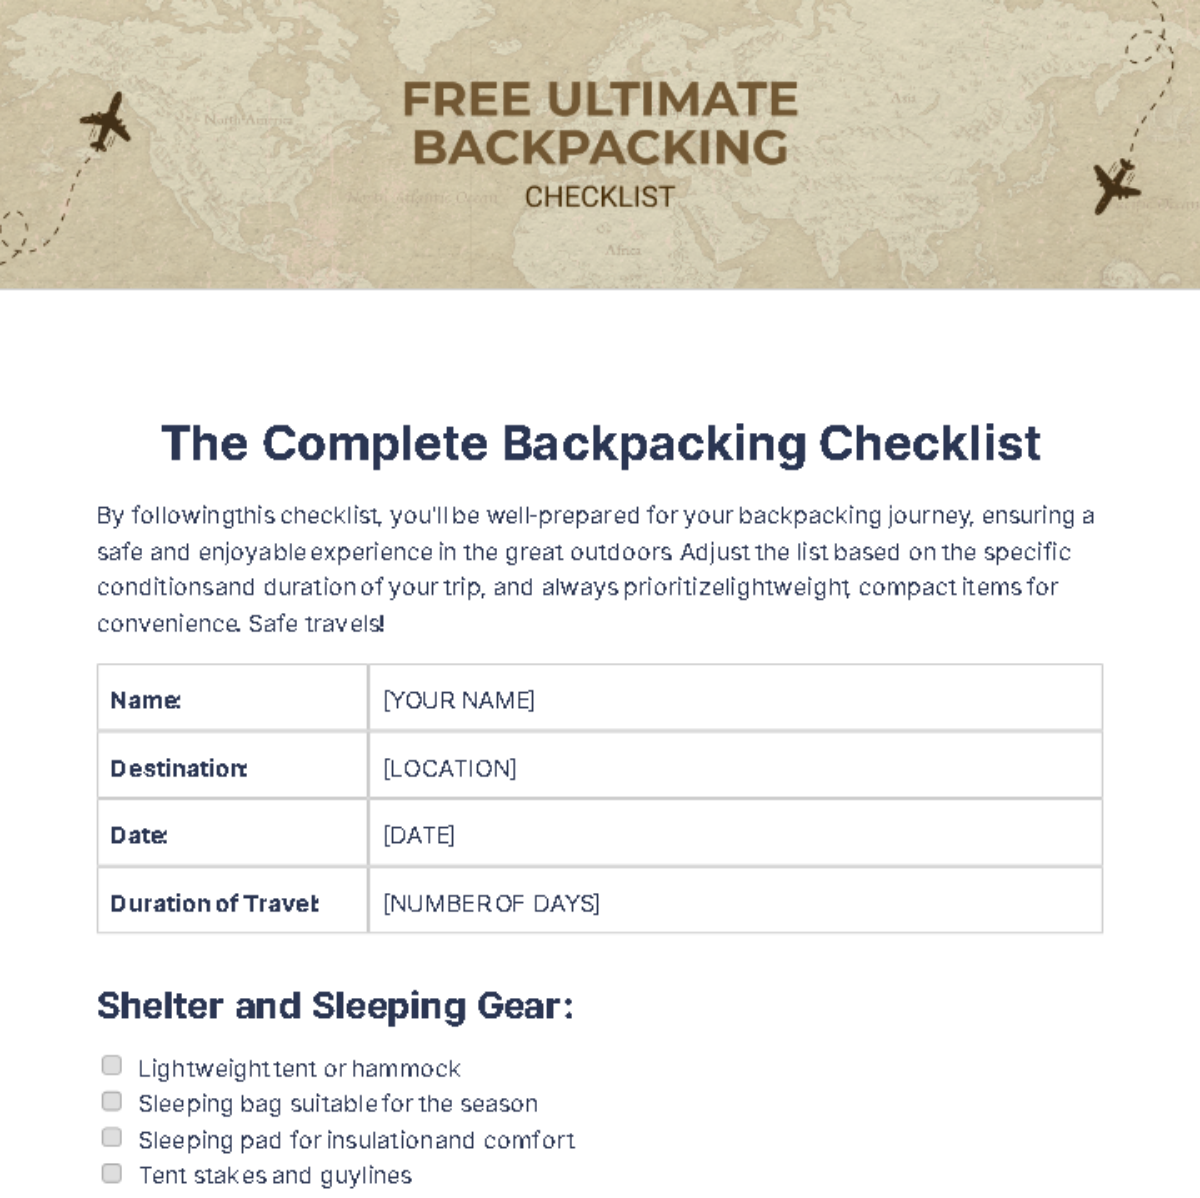 Free Ultimate Backpacking Checklist Template